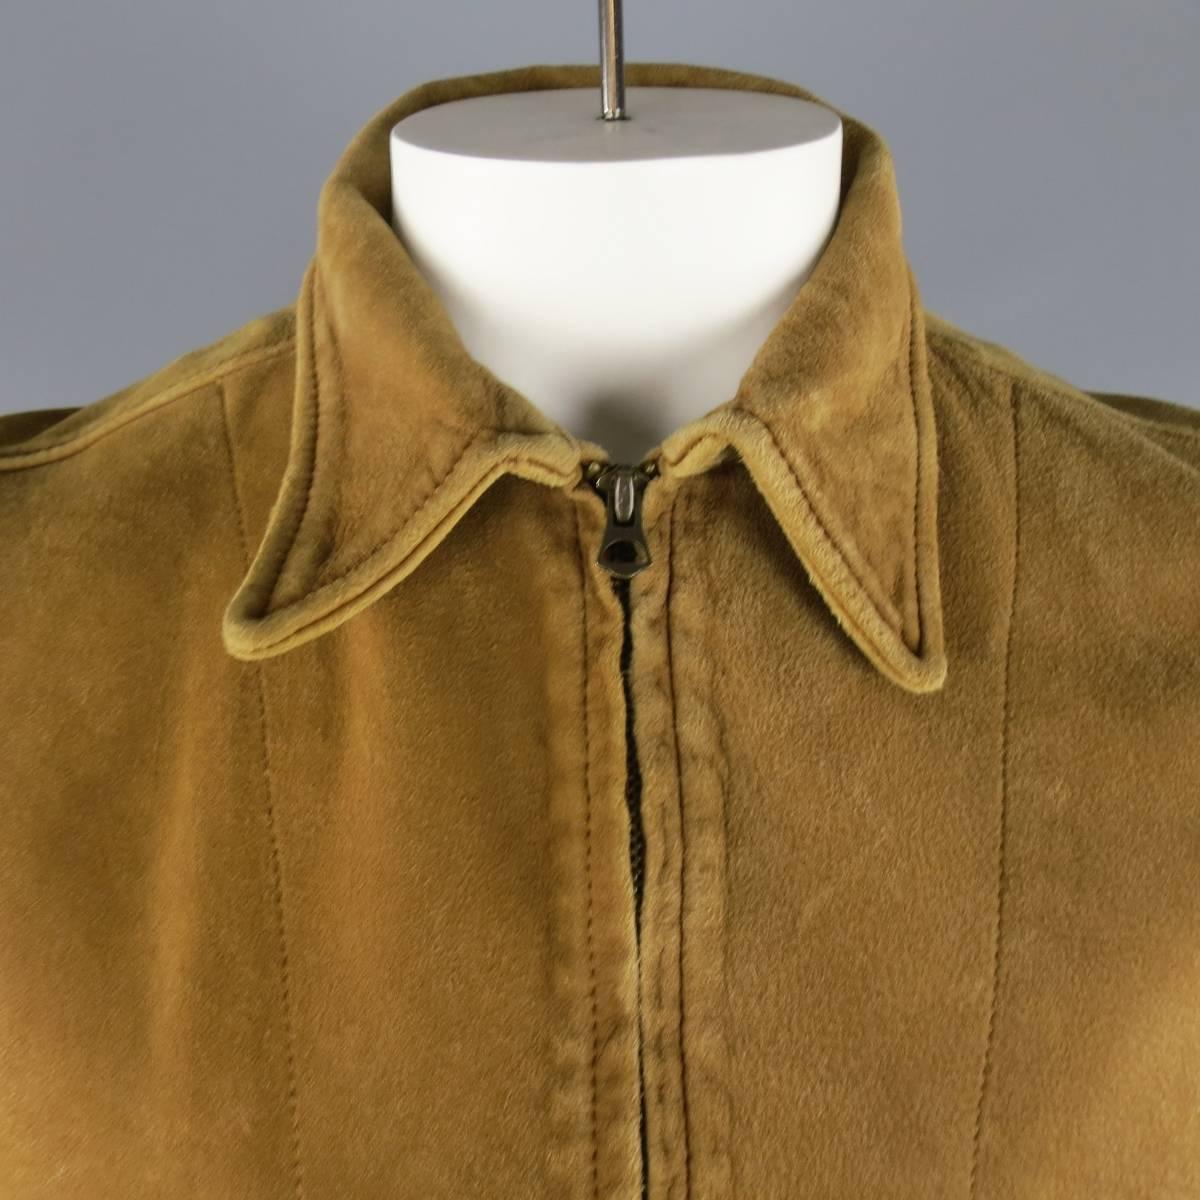 LEVI'S VINTAGE Jacket consists of sheep skin material in a tan color tone. Designed with a brass zip-up front, pointed collar and bottom inseam pockets. Detailed in a distressed overall look, adjustable double-button cuffs and waist band. Made in